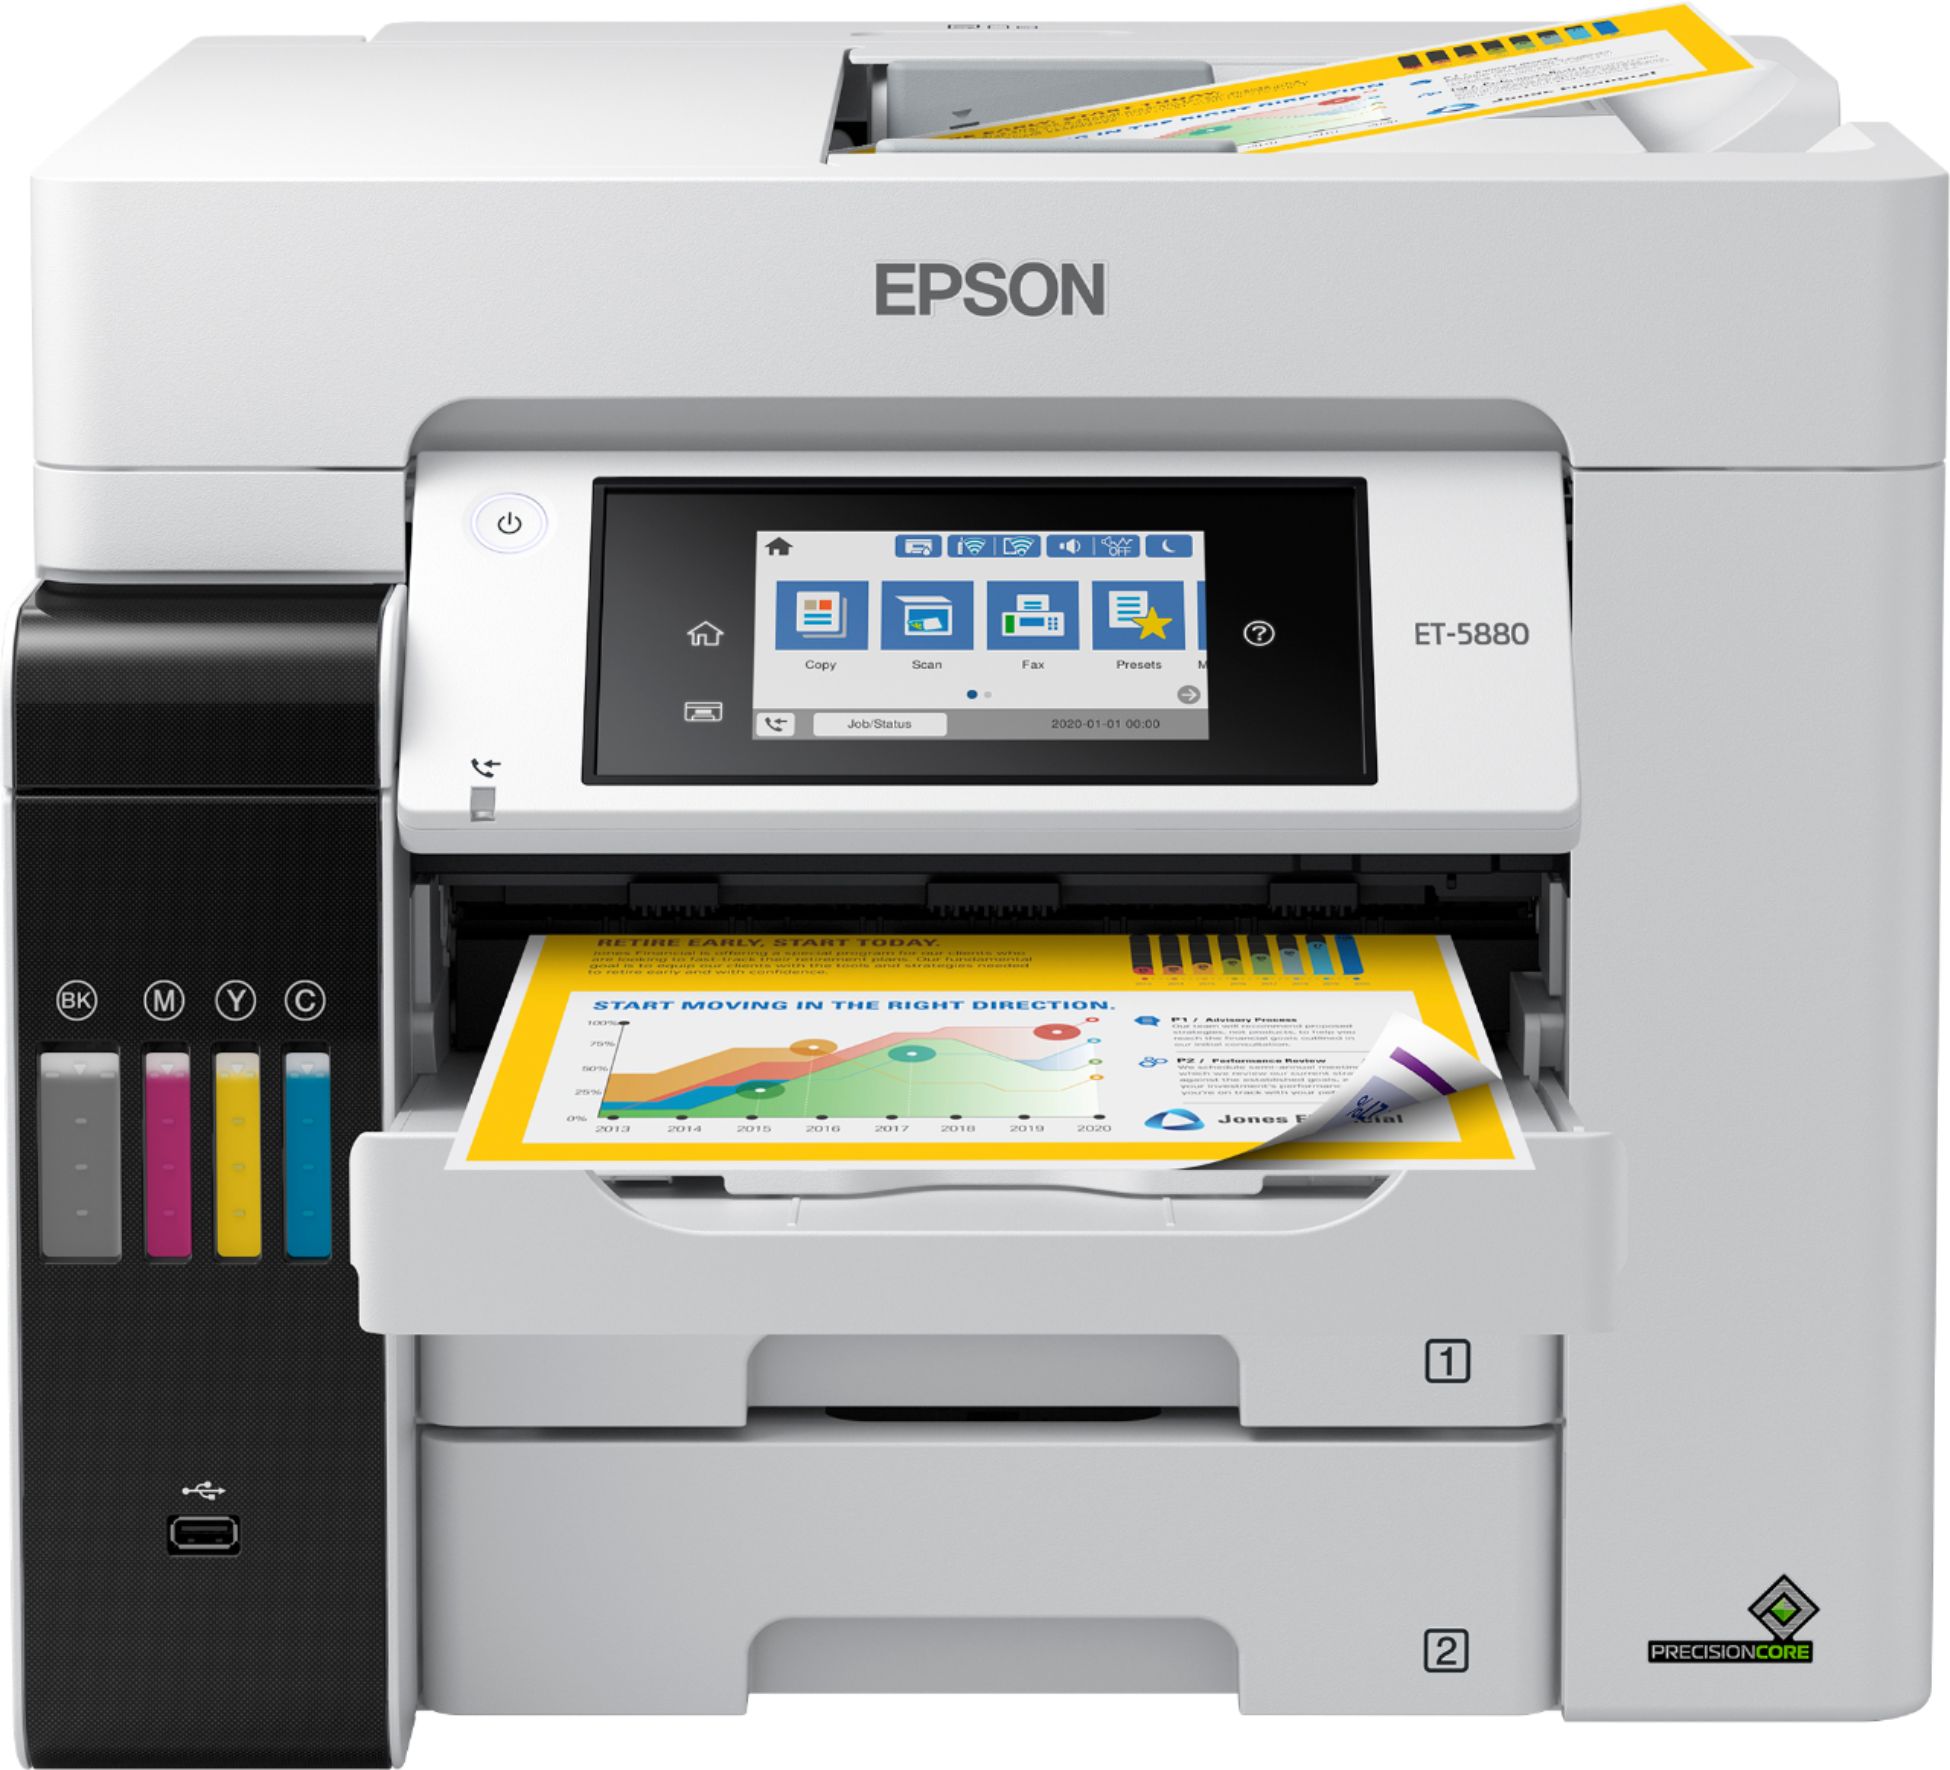 Why Do You Need a Wireless Printer? – The Benefits of Wireless Printers -  Ebuyer Blog